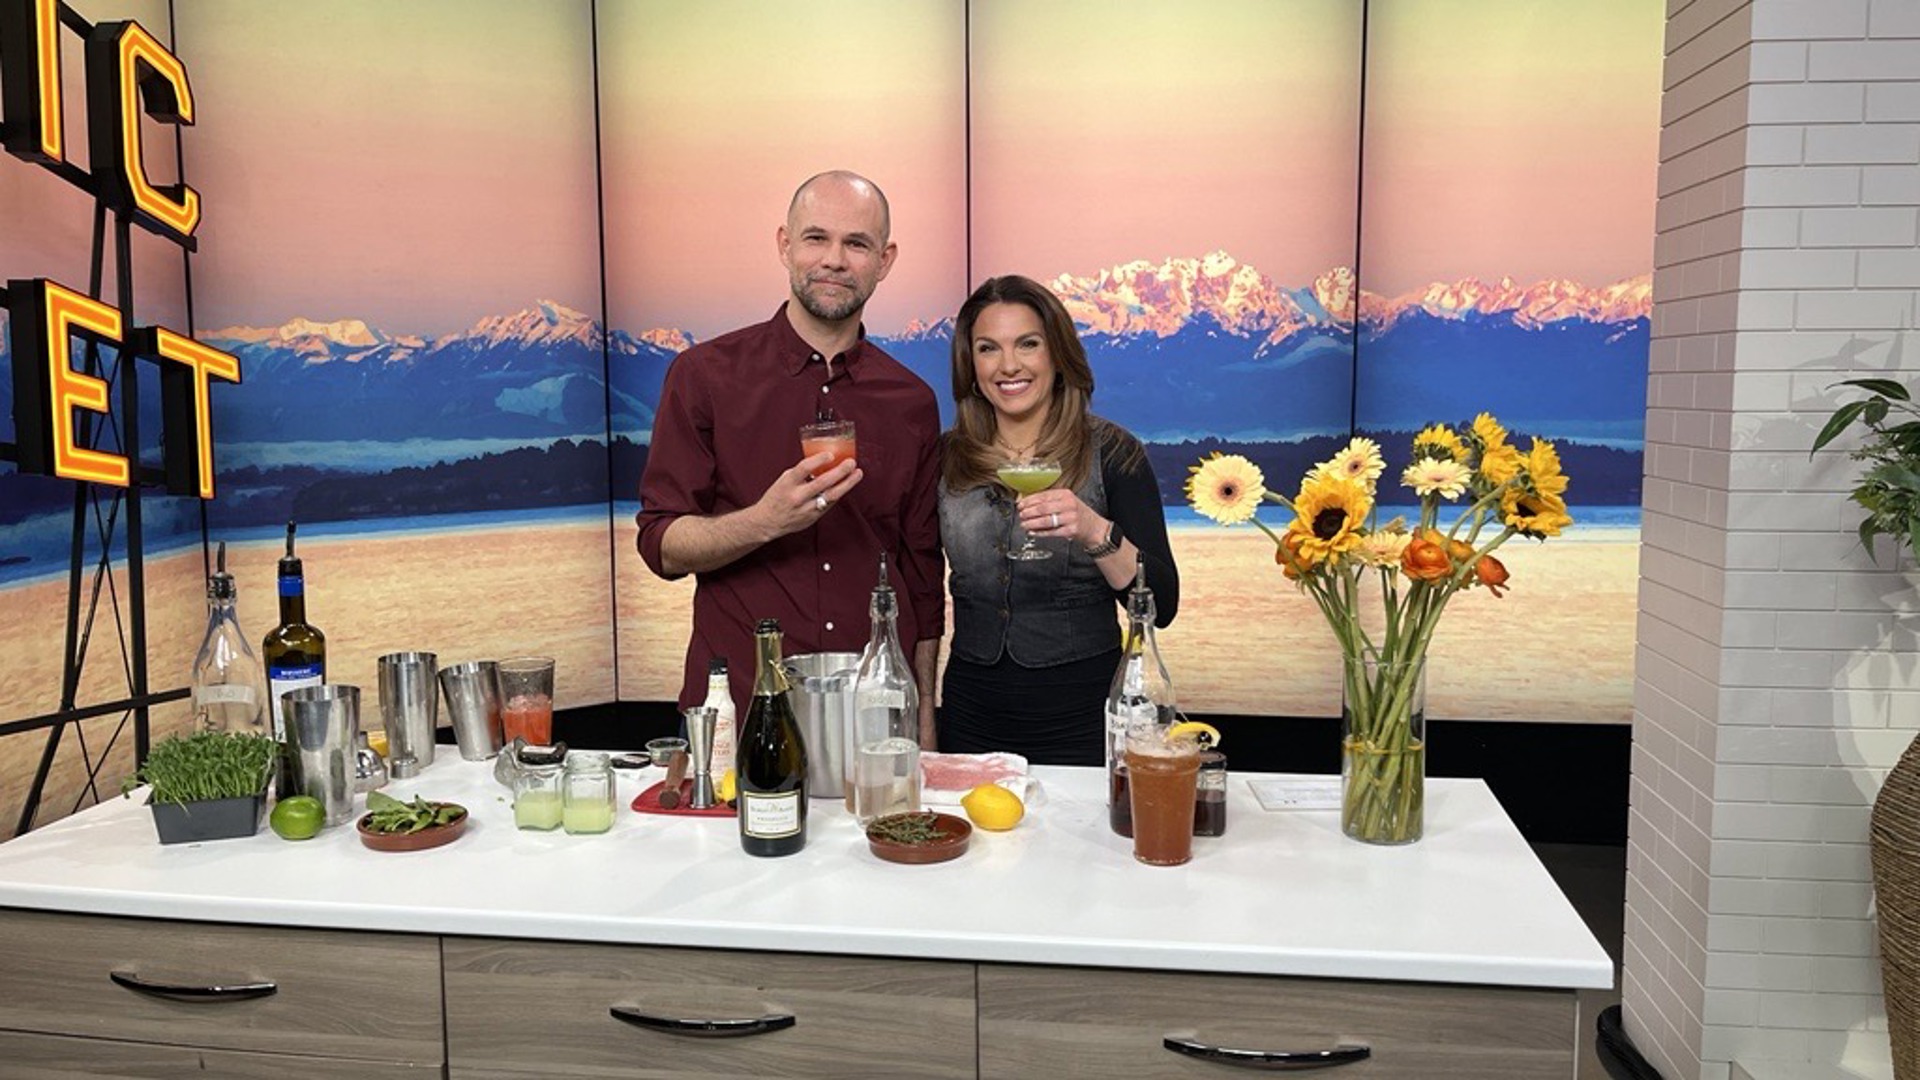 Elihu Estevane from Seattle's Mioposto shows Amity how to make the perfect cocktail to drink while enjoying the spring weather. #newdaynw